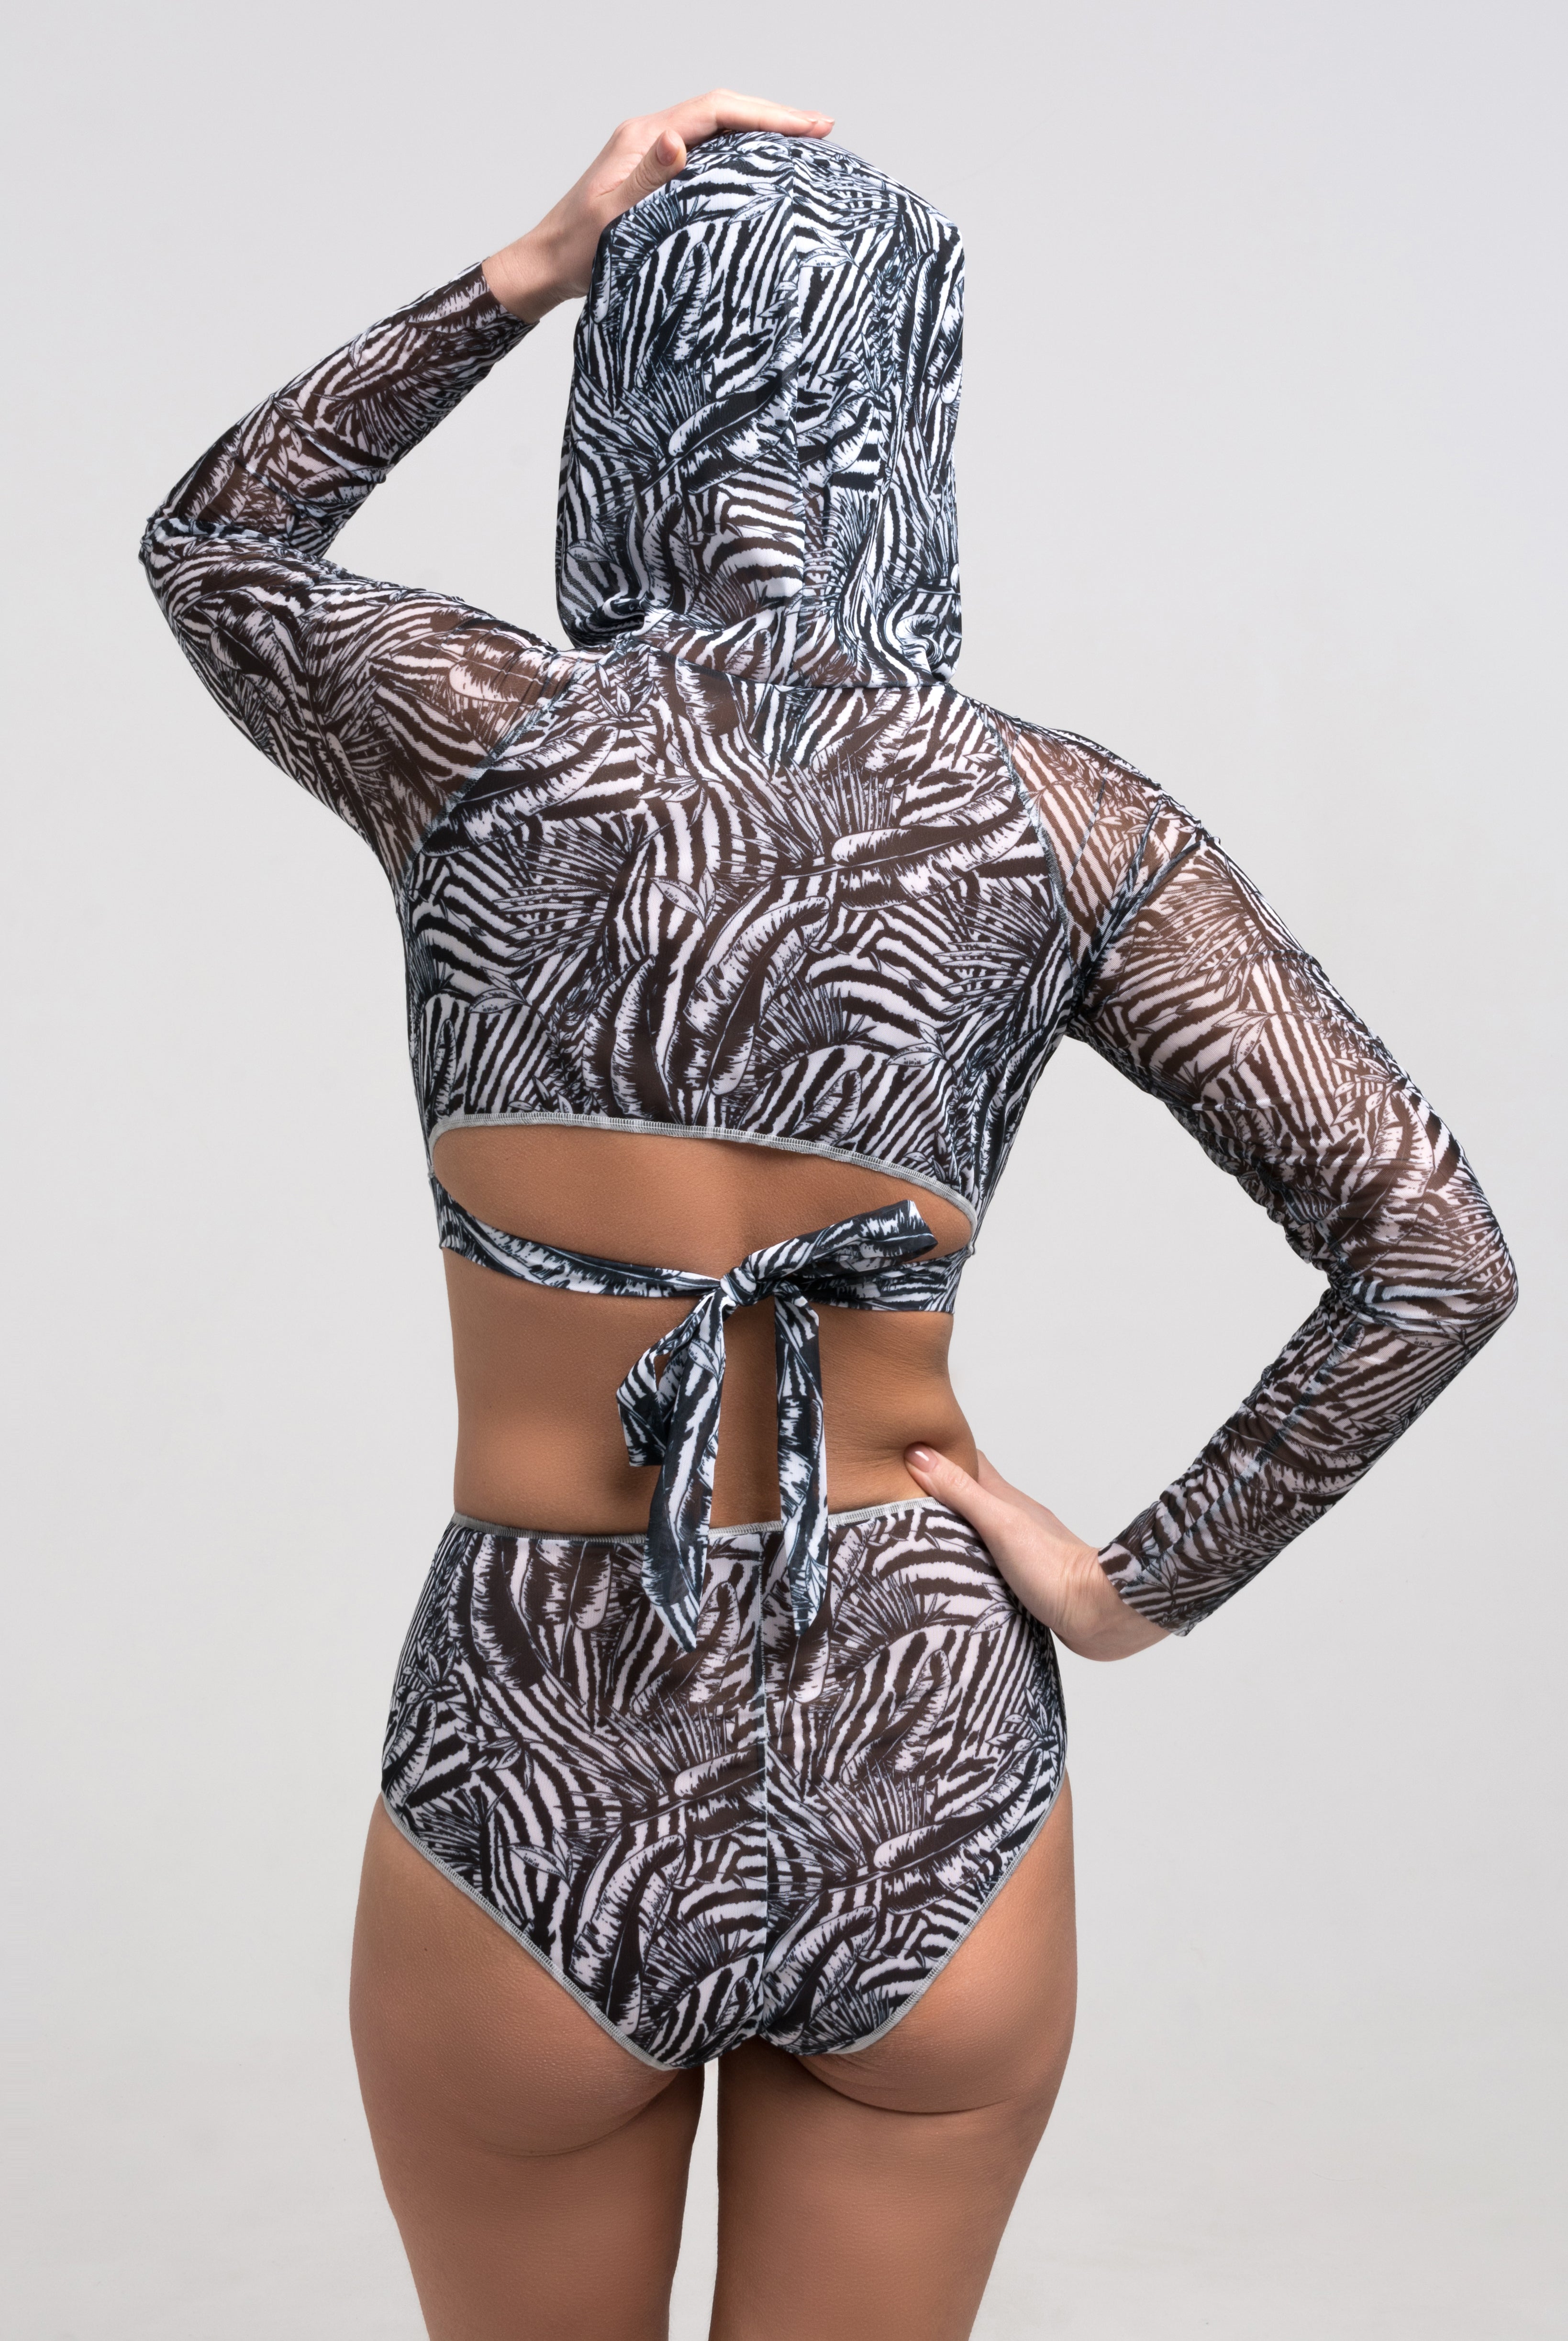 Discover sustainable tan-through smart swimsuits adorned with a trendy Fake Zebra print in this file. Featuring a high-waist bikini design, they offer both style and sun protection.